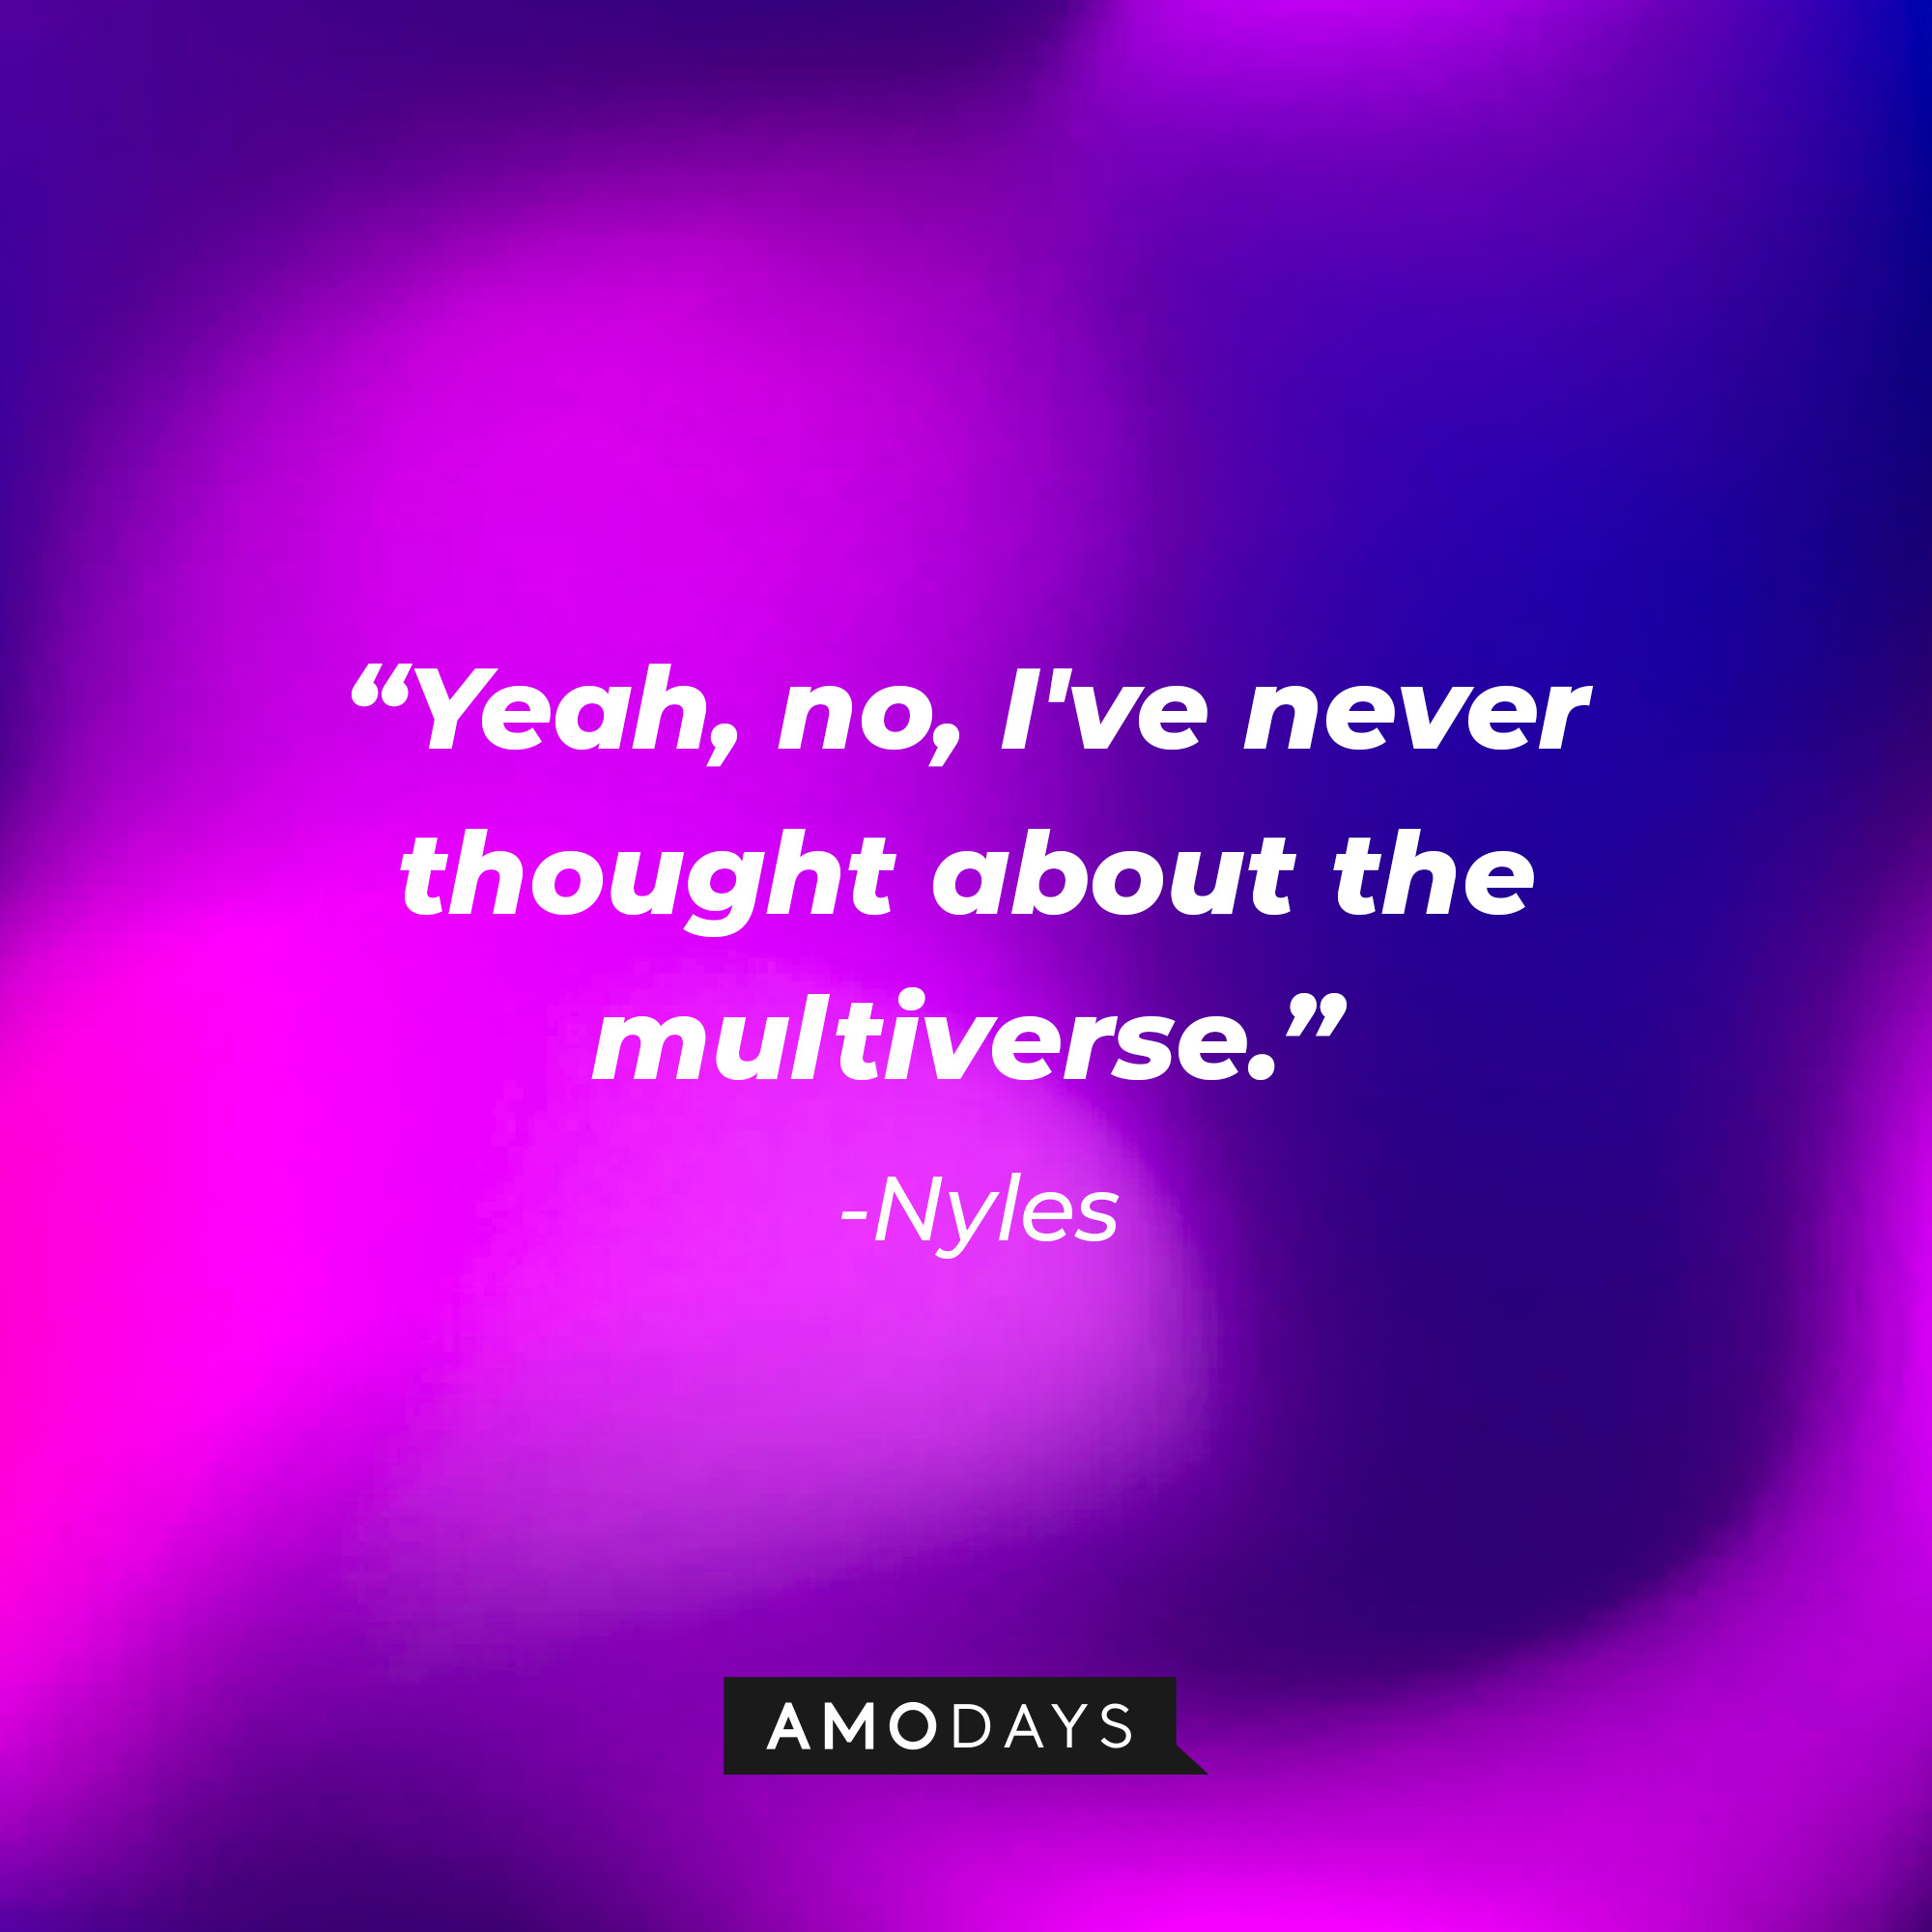 Nyles’ quote: "Yeah, no, I've never thought about the multiverse.” │ Source: AmoDays